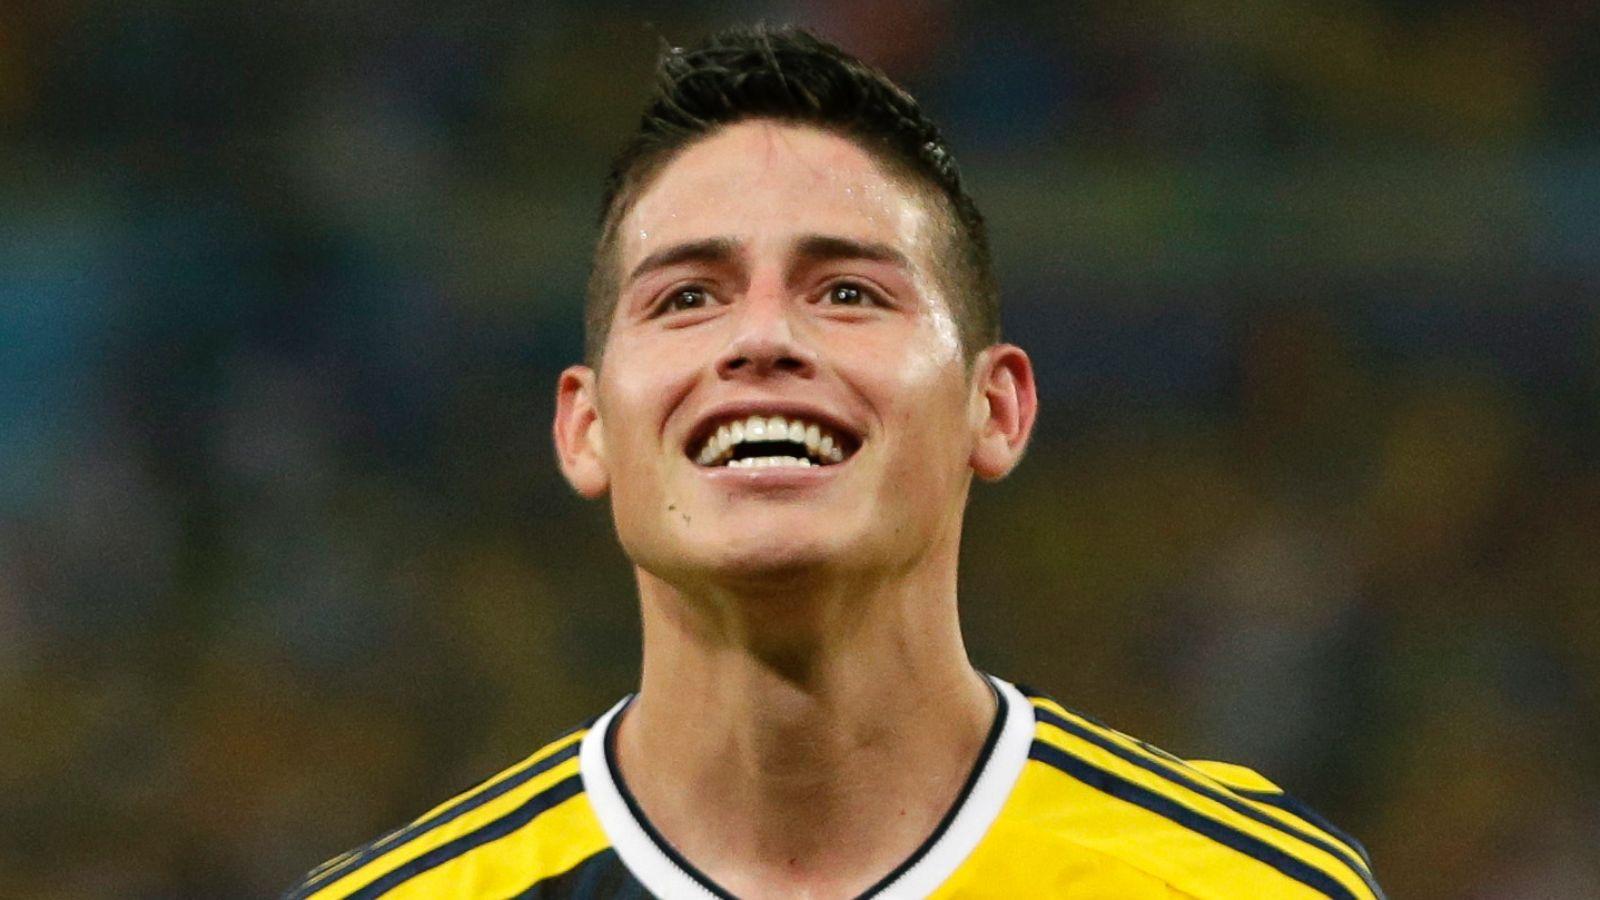 World Cup: Meet Colombia's James Rodriguez, Soccer's